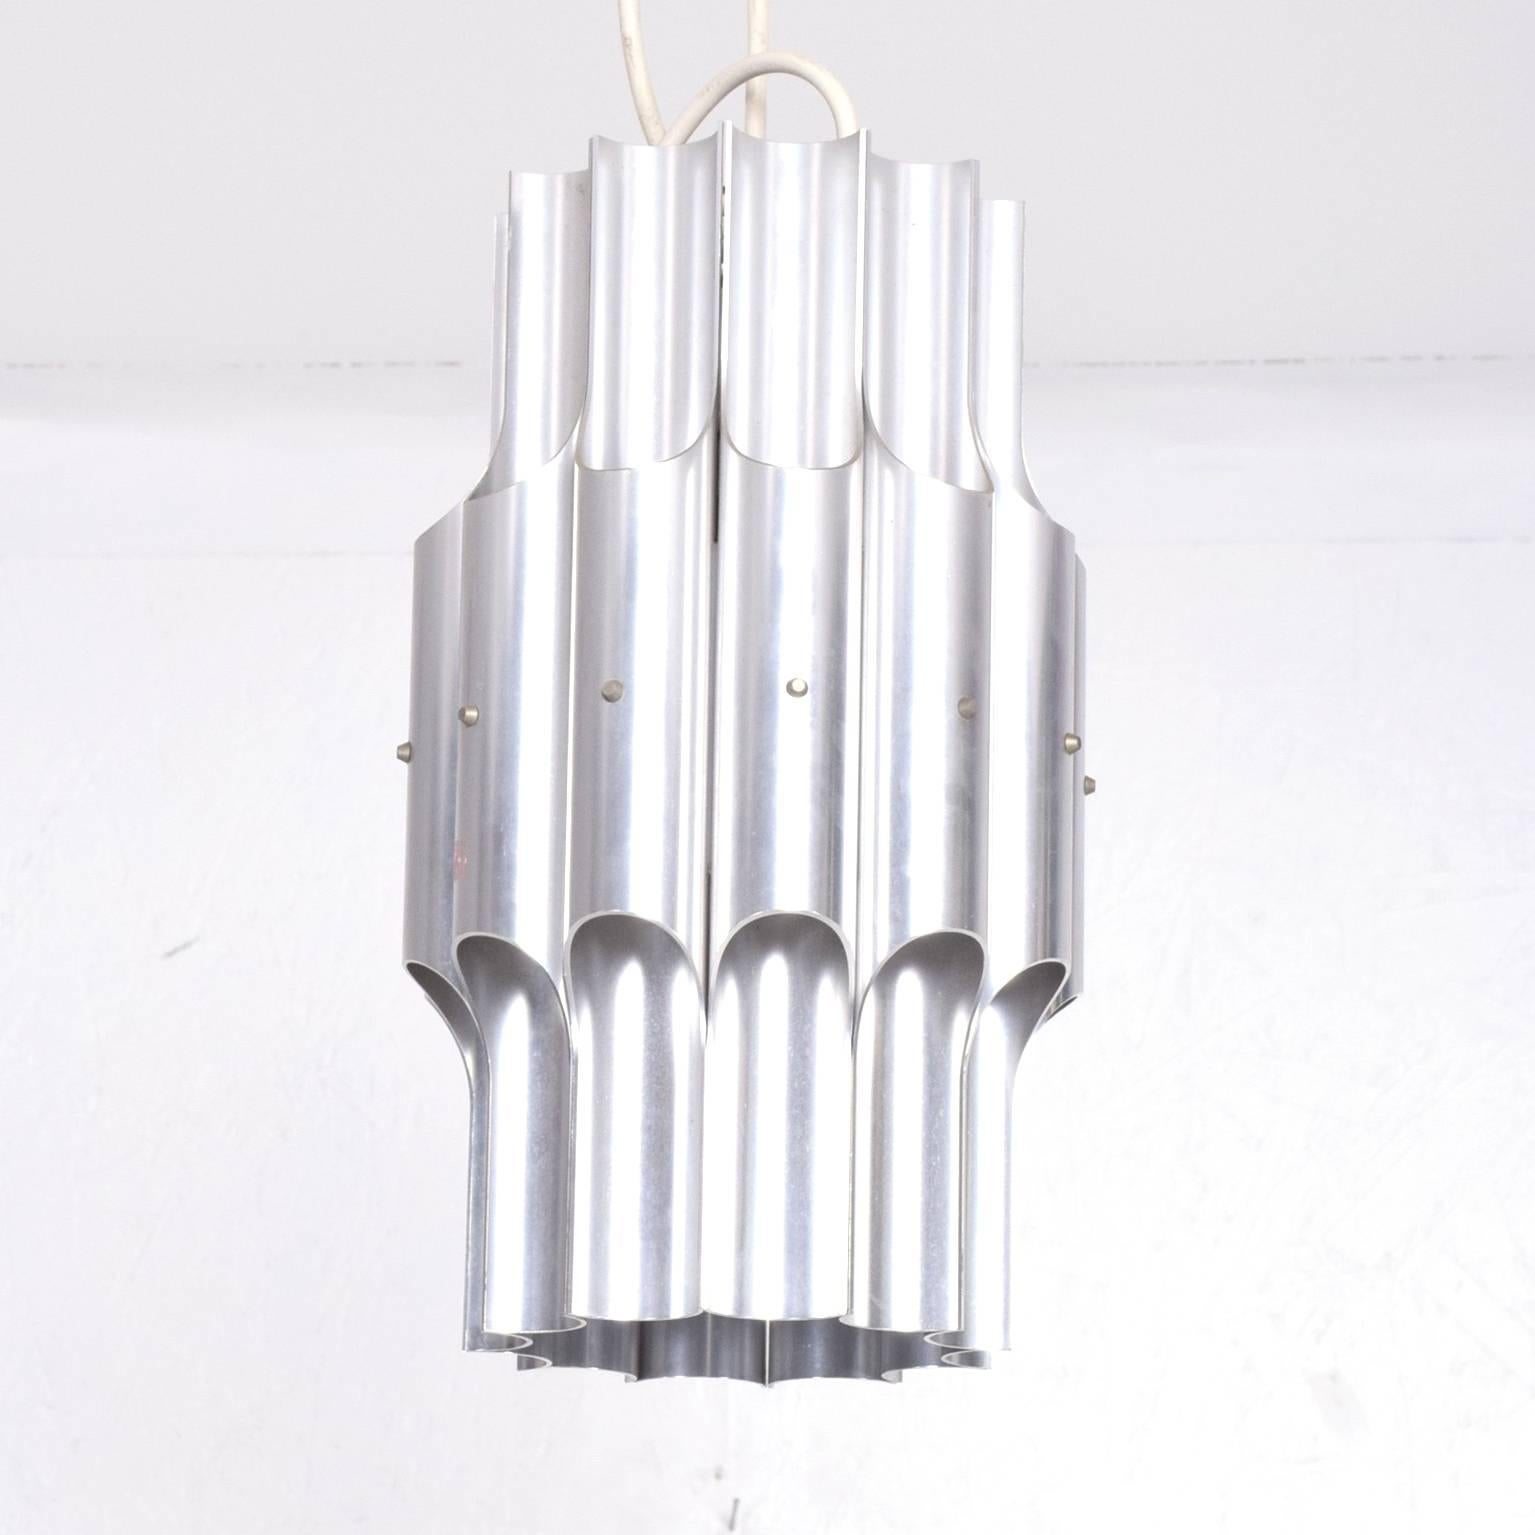 For your consideration a vintage hanging lamp constructed with aluminium tubes with sculptural cuts, allowing the light to be diffused in a very spectacular way. 

Unmarked, no information from the maker present. 

Original electrical cord, can